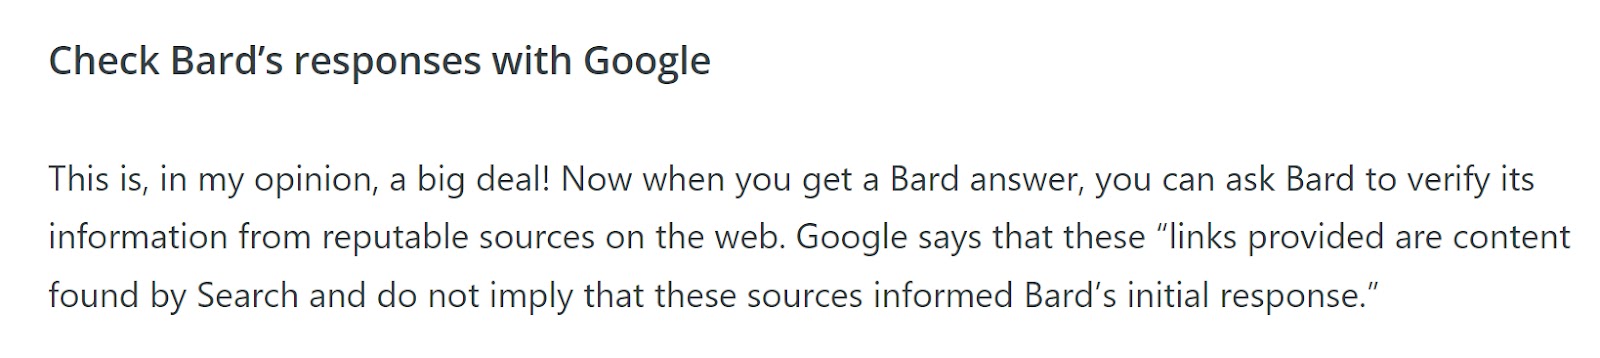 Search News You Can Use' section on Google Bard